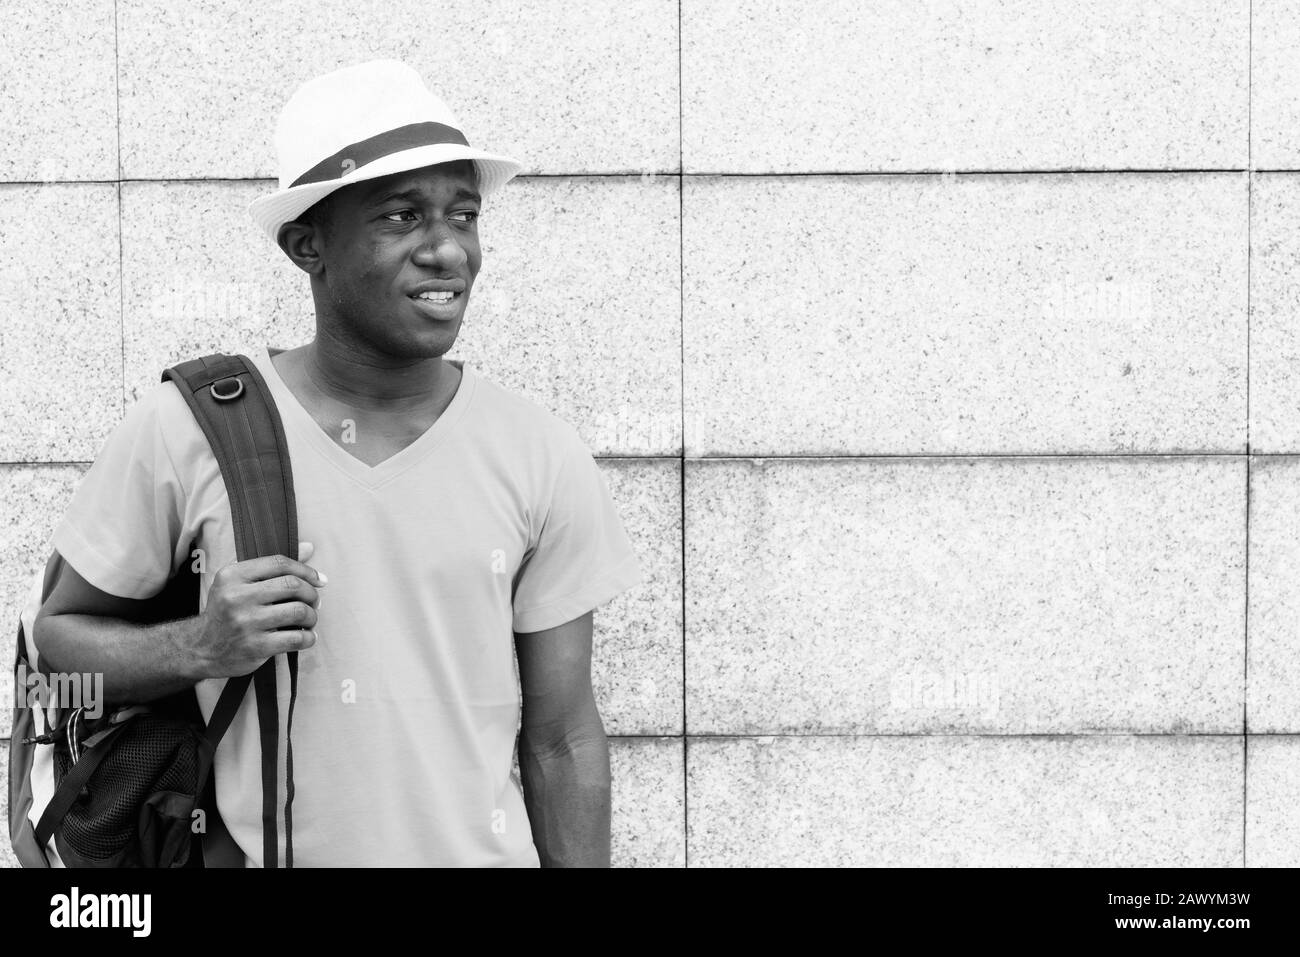 Young African tourist man holding backpack while thinking against concrete block wall Stock Photo